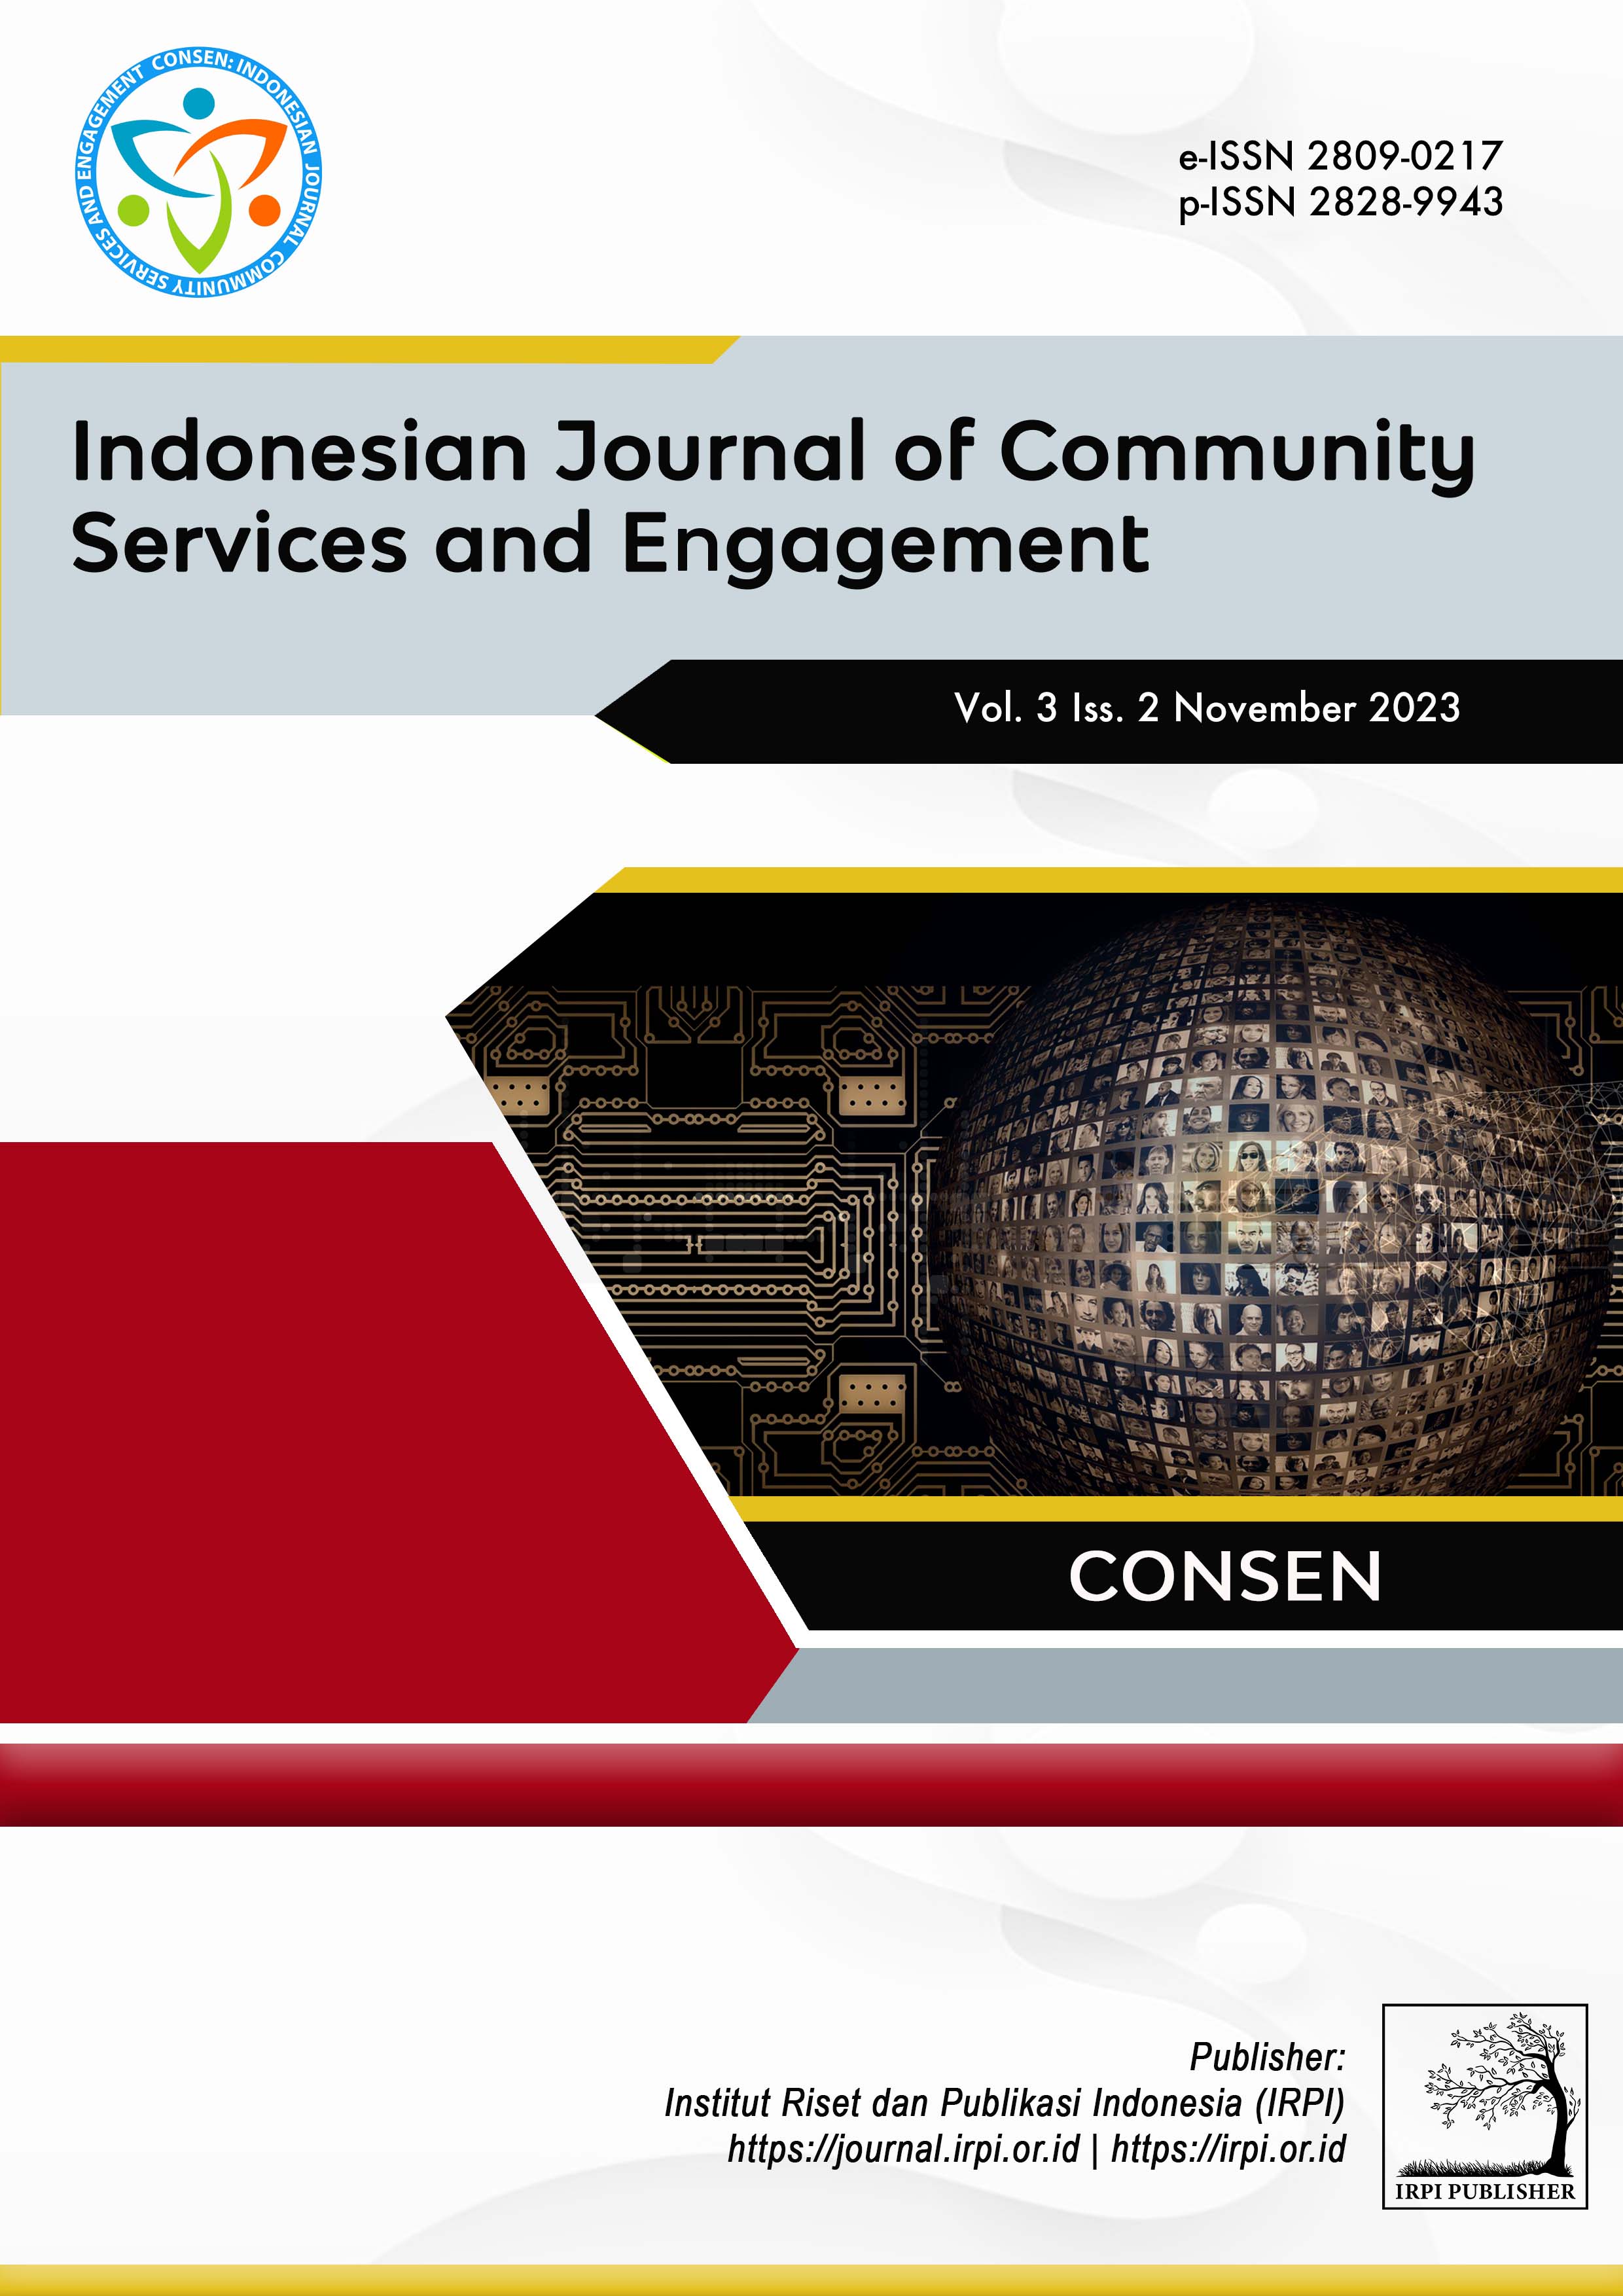 					View Vol. 3 No. 2 (2023): Consen: Indonesian Journal of Community Services and Engagement 
				